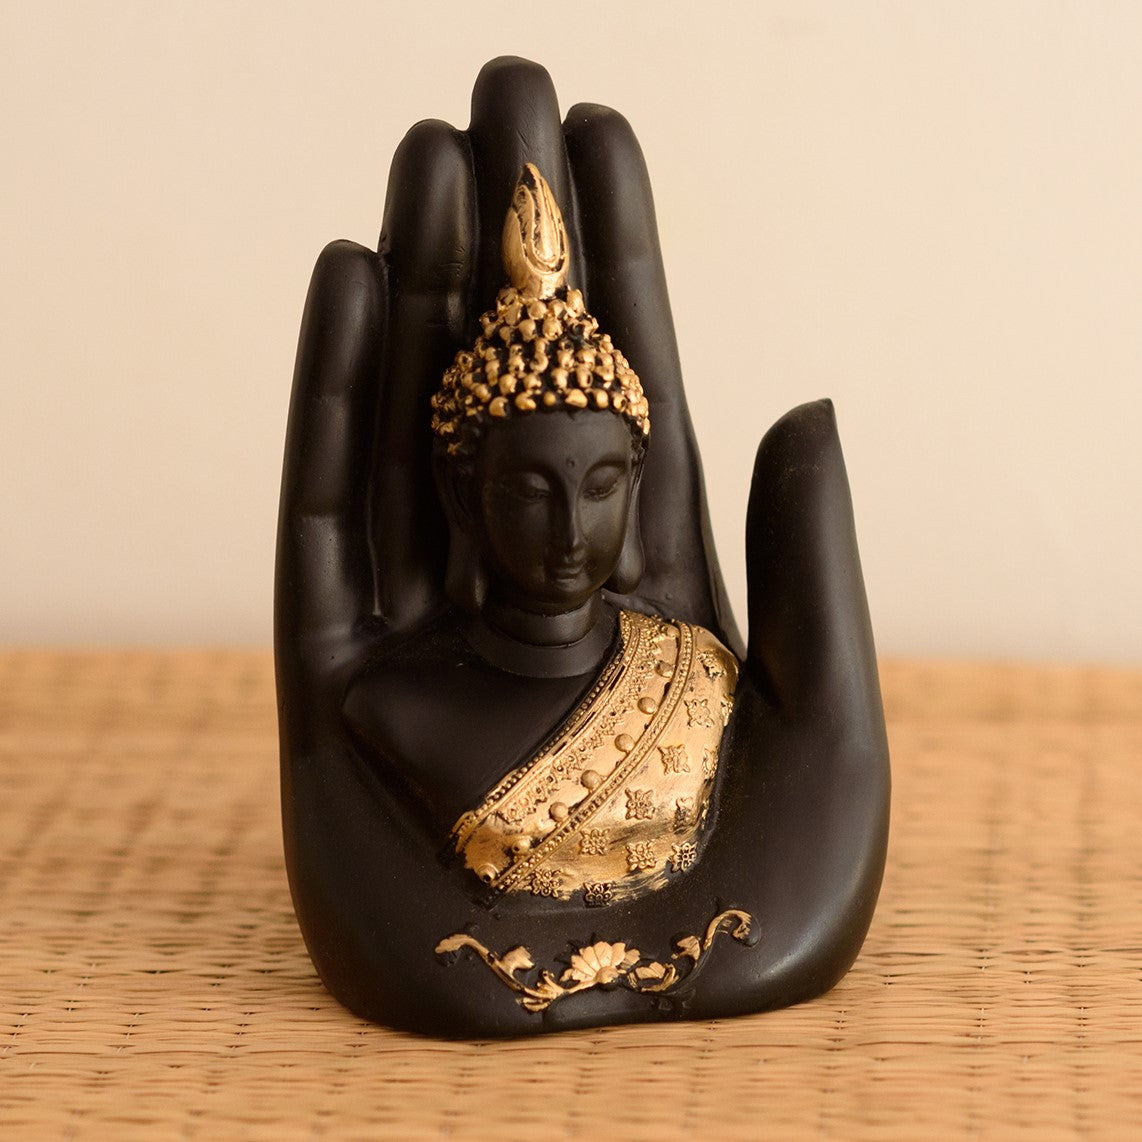 eCraftIndia The Thoughtful Gift Box - Black and Golden Handcrafted Palm Buddha Statue, Set of 5 Lavender, Jasmine, Rose, Lemon Grass, Sandalwood Aroma Oils, Aroma Diffuser, 2 Tea Light Candle Holders, Super Calm, Lemon Grass Hand Poured Soya Wax Candles 5